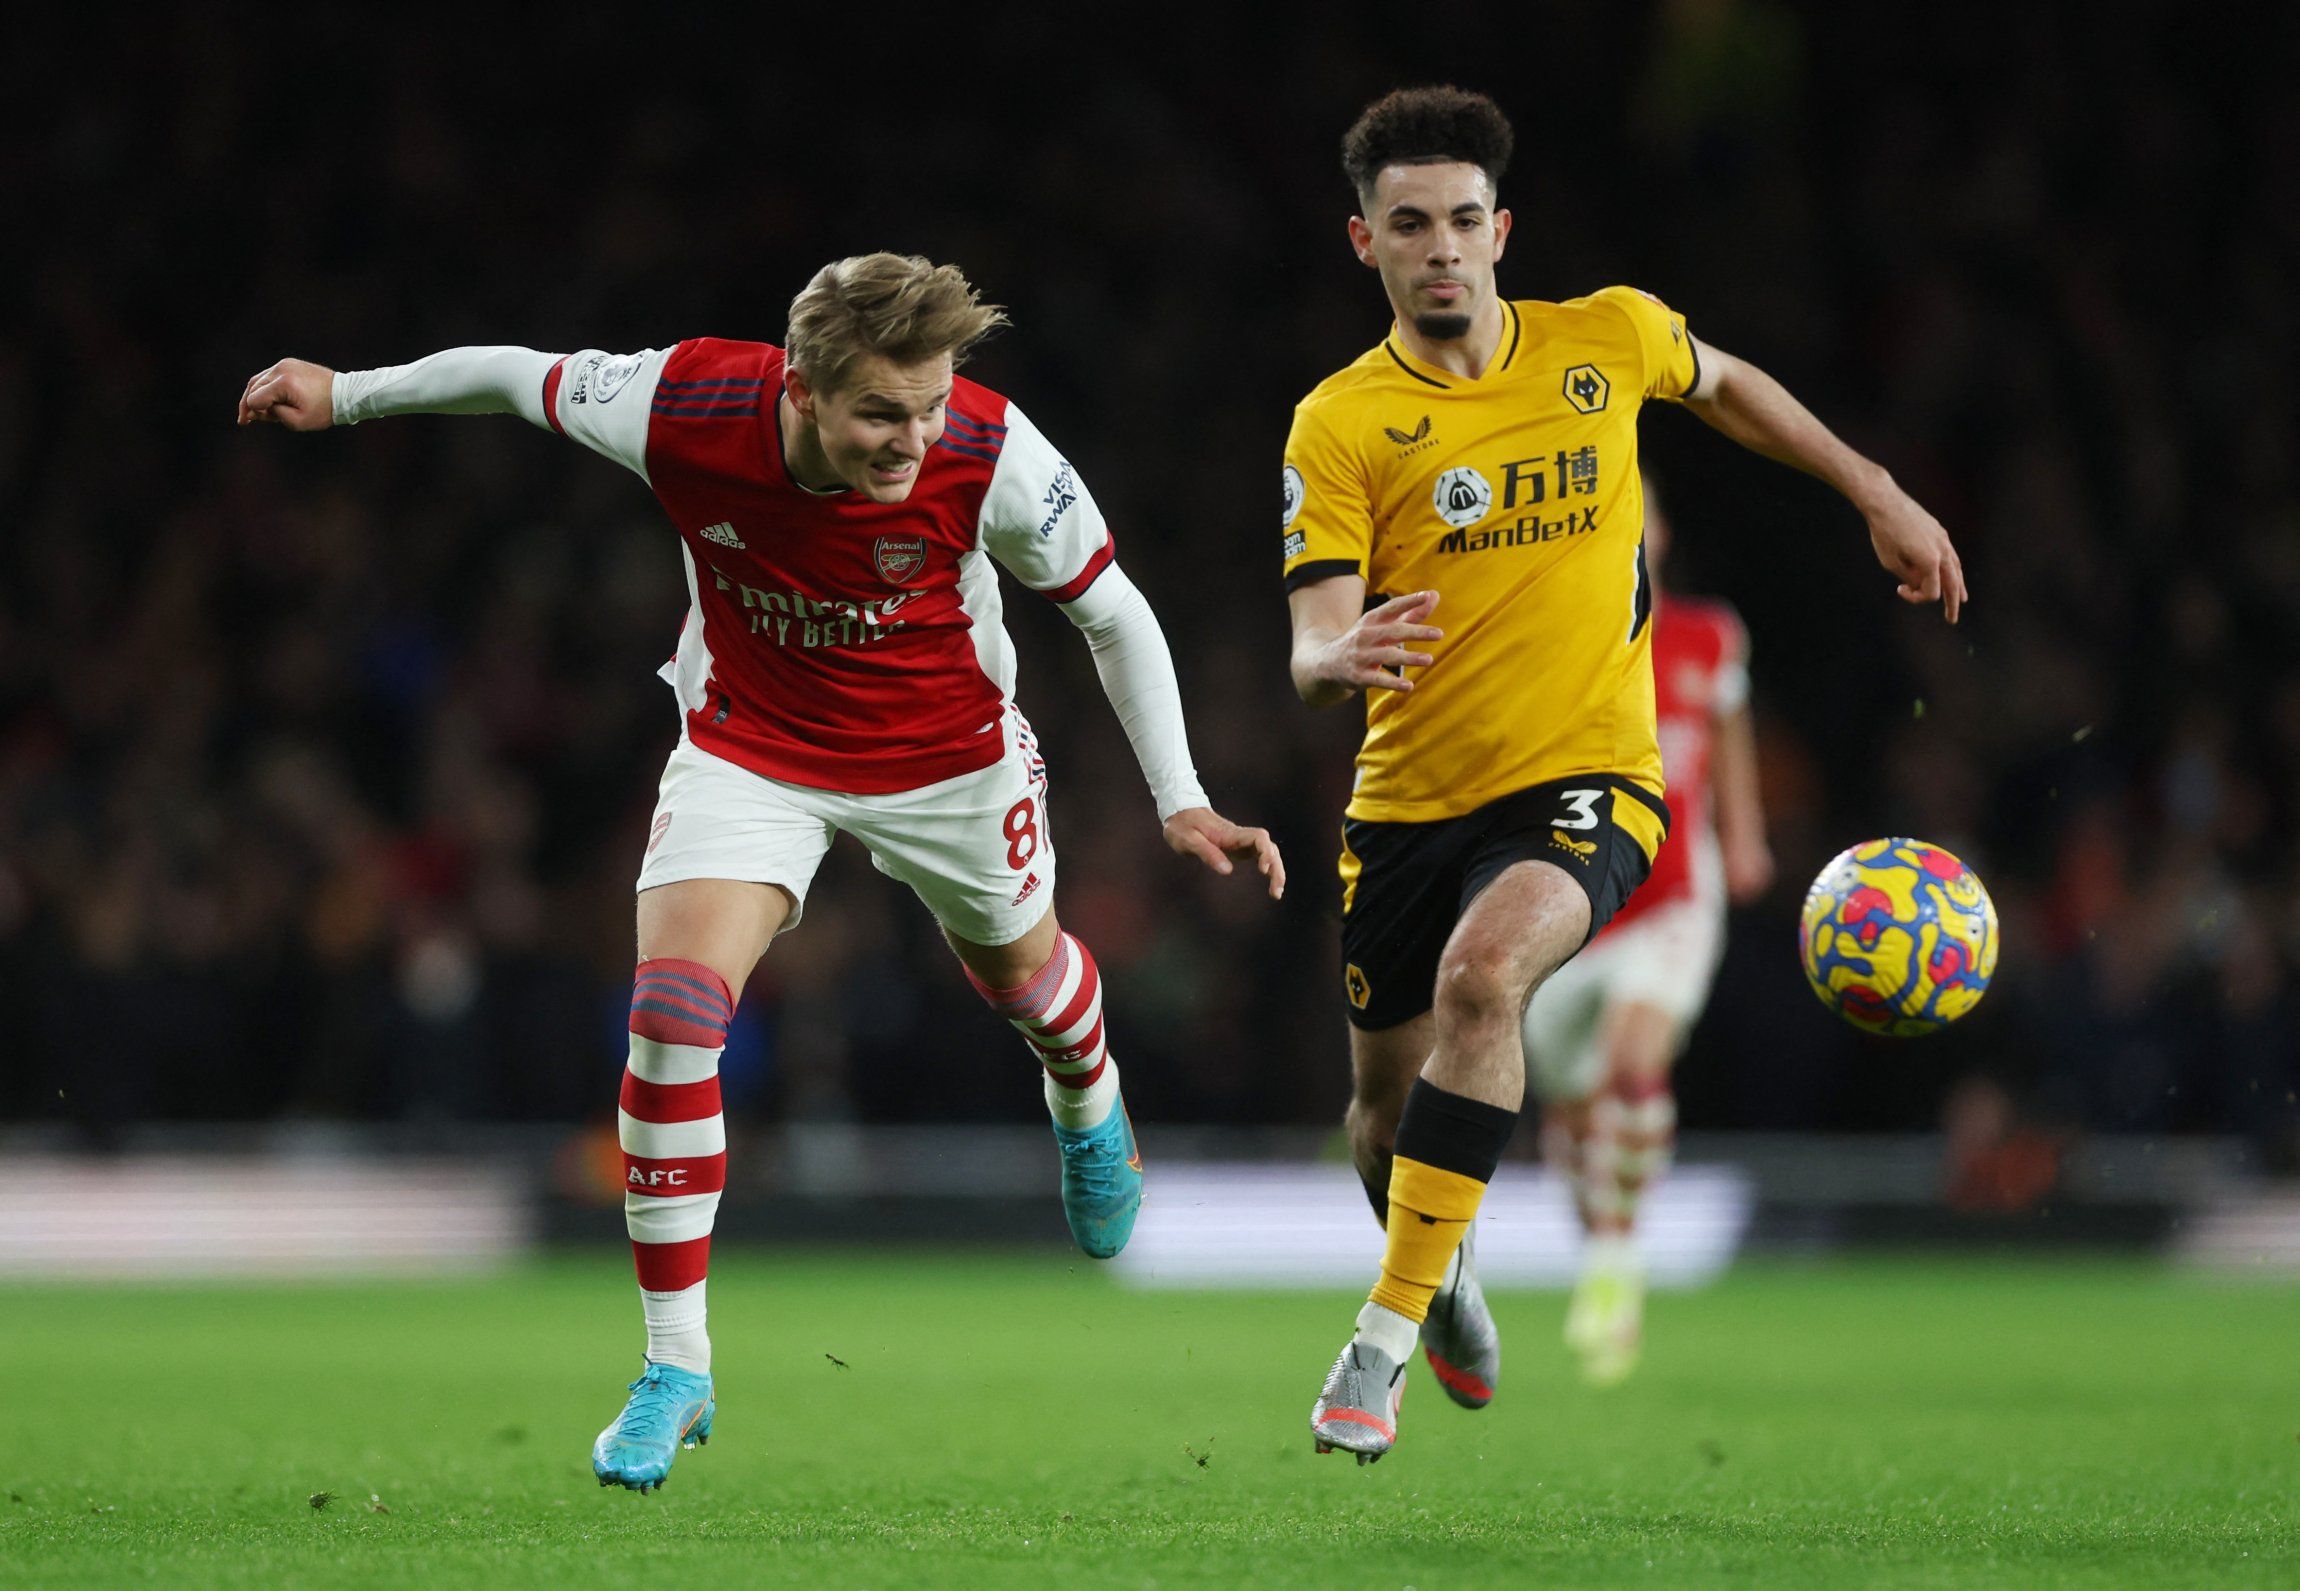 Arsenal midfielder Martin Odegaard in action against Wolves in the Premier League